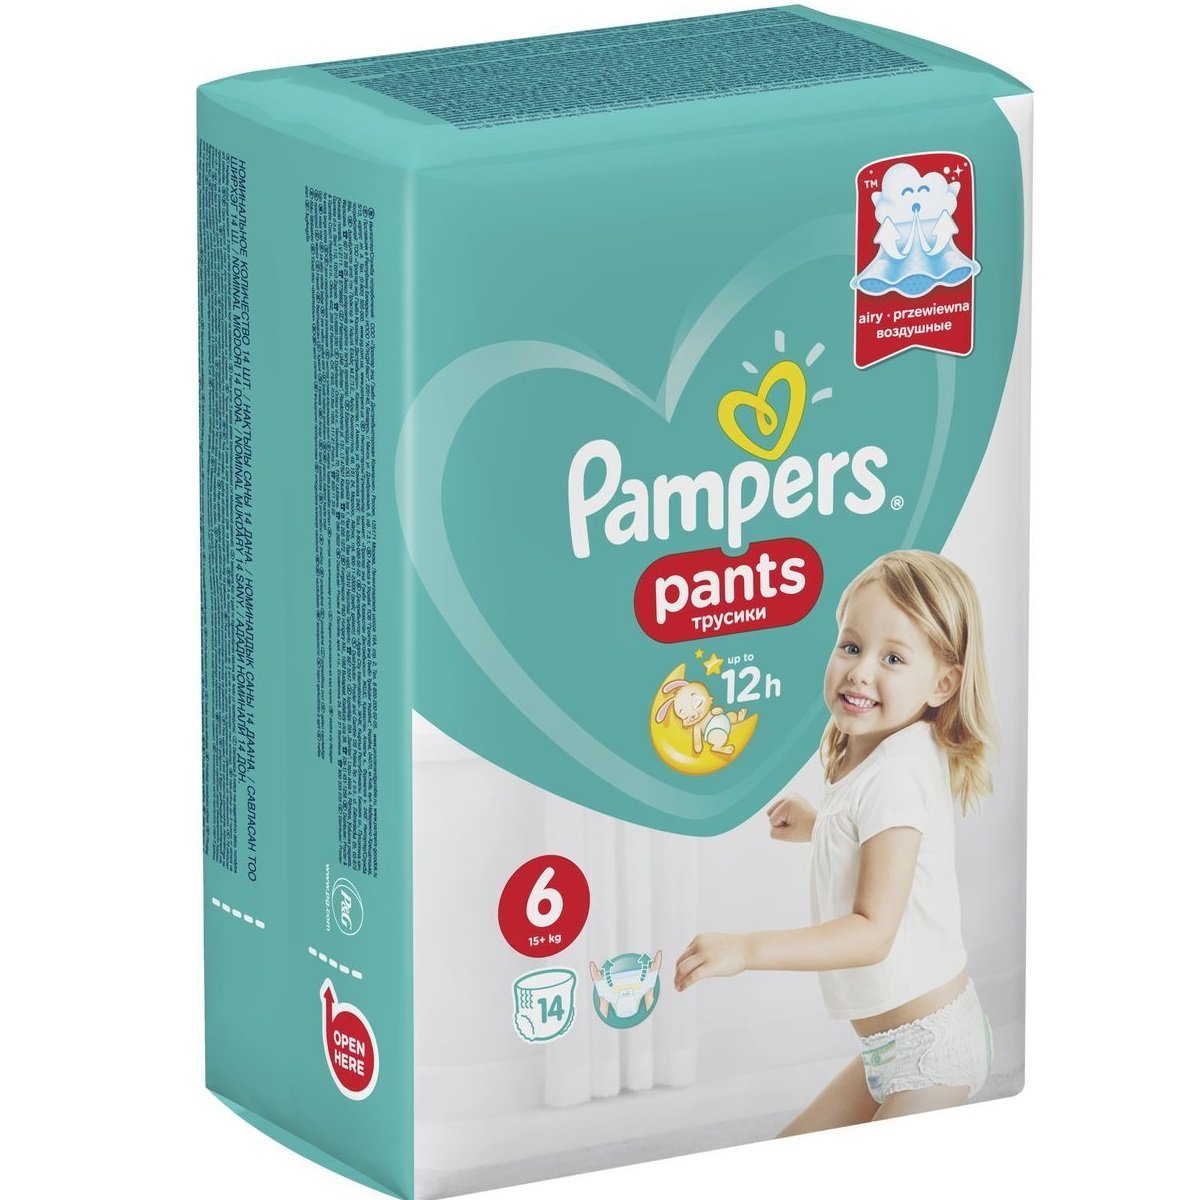 Buy Pampers Pants Baby Diapers Size 6 Junior Plus 38 Count - Pandamart -  Blue Area online delivery in